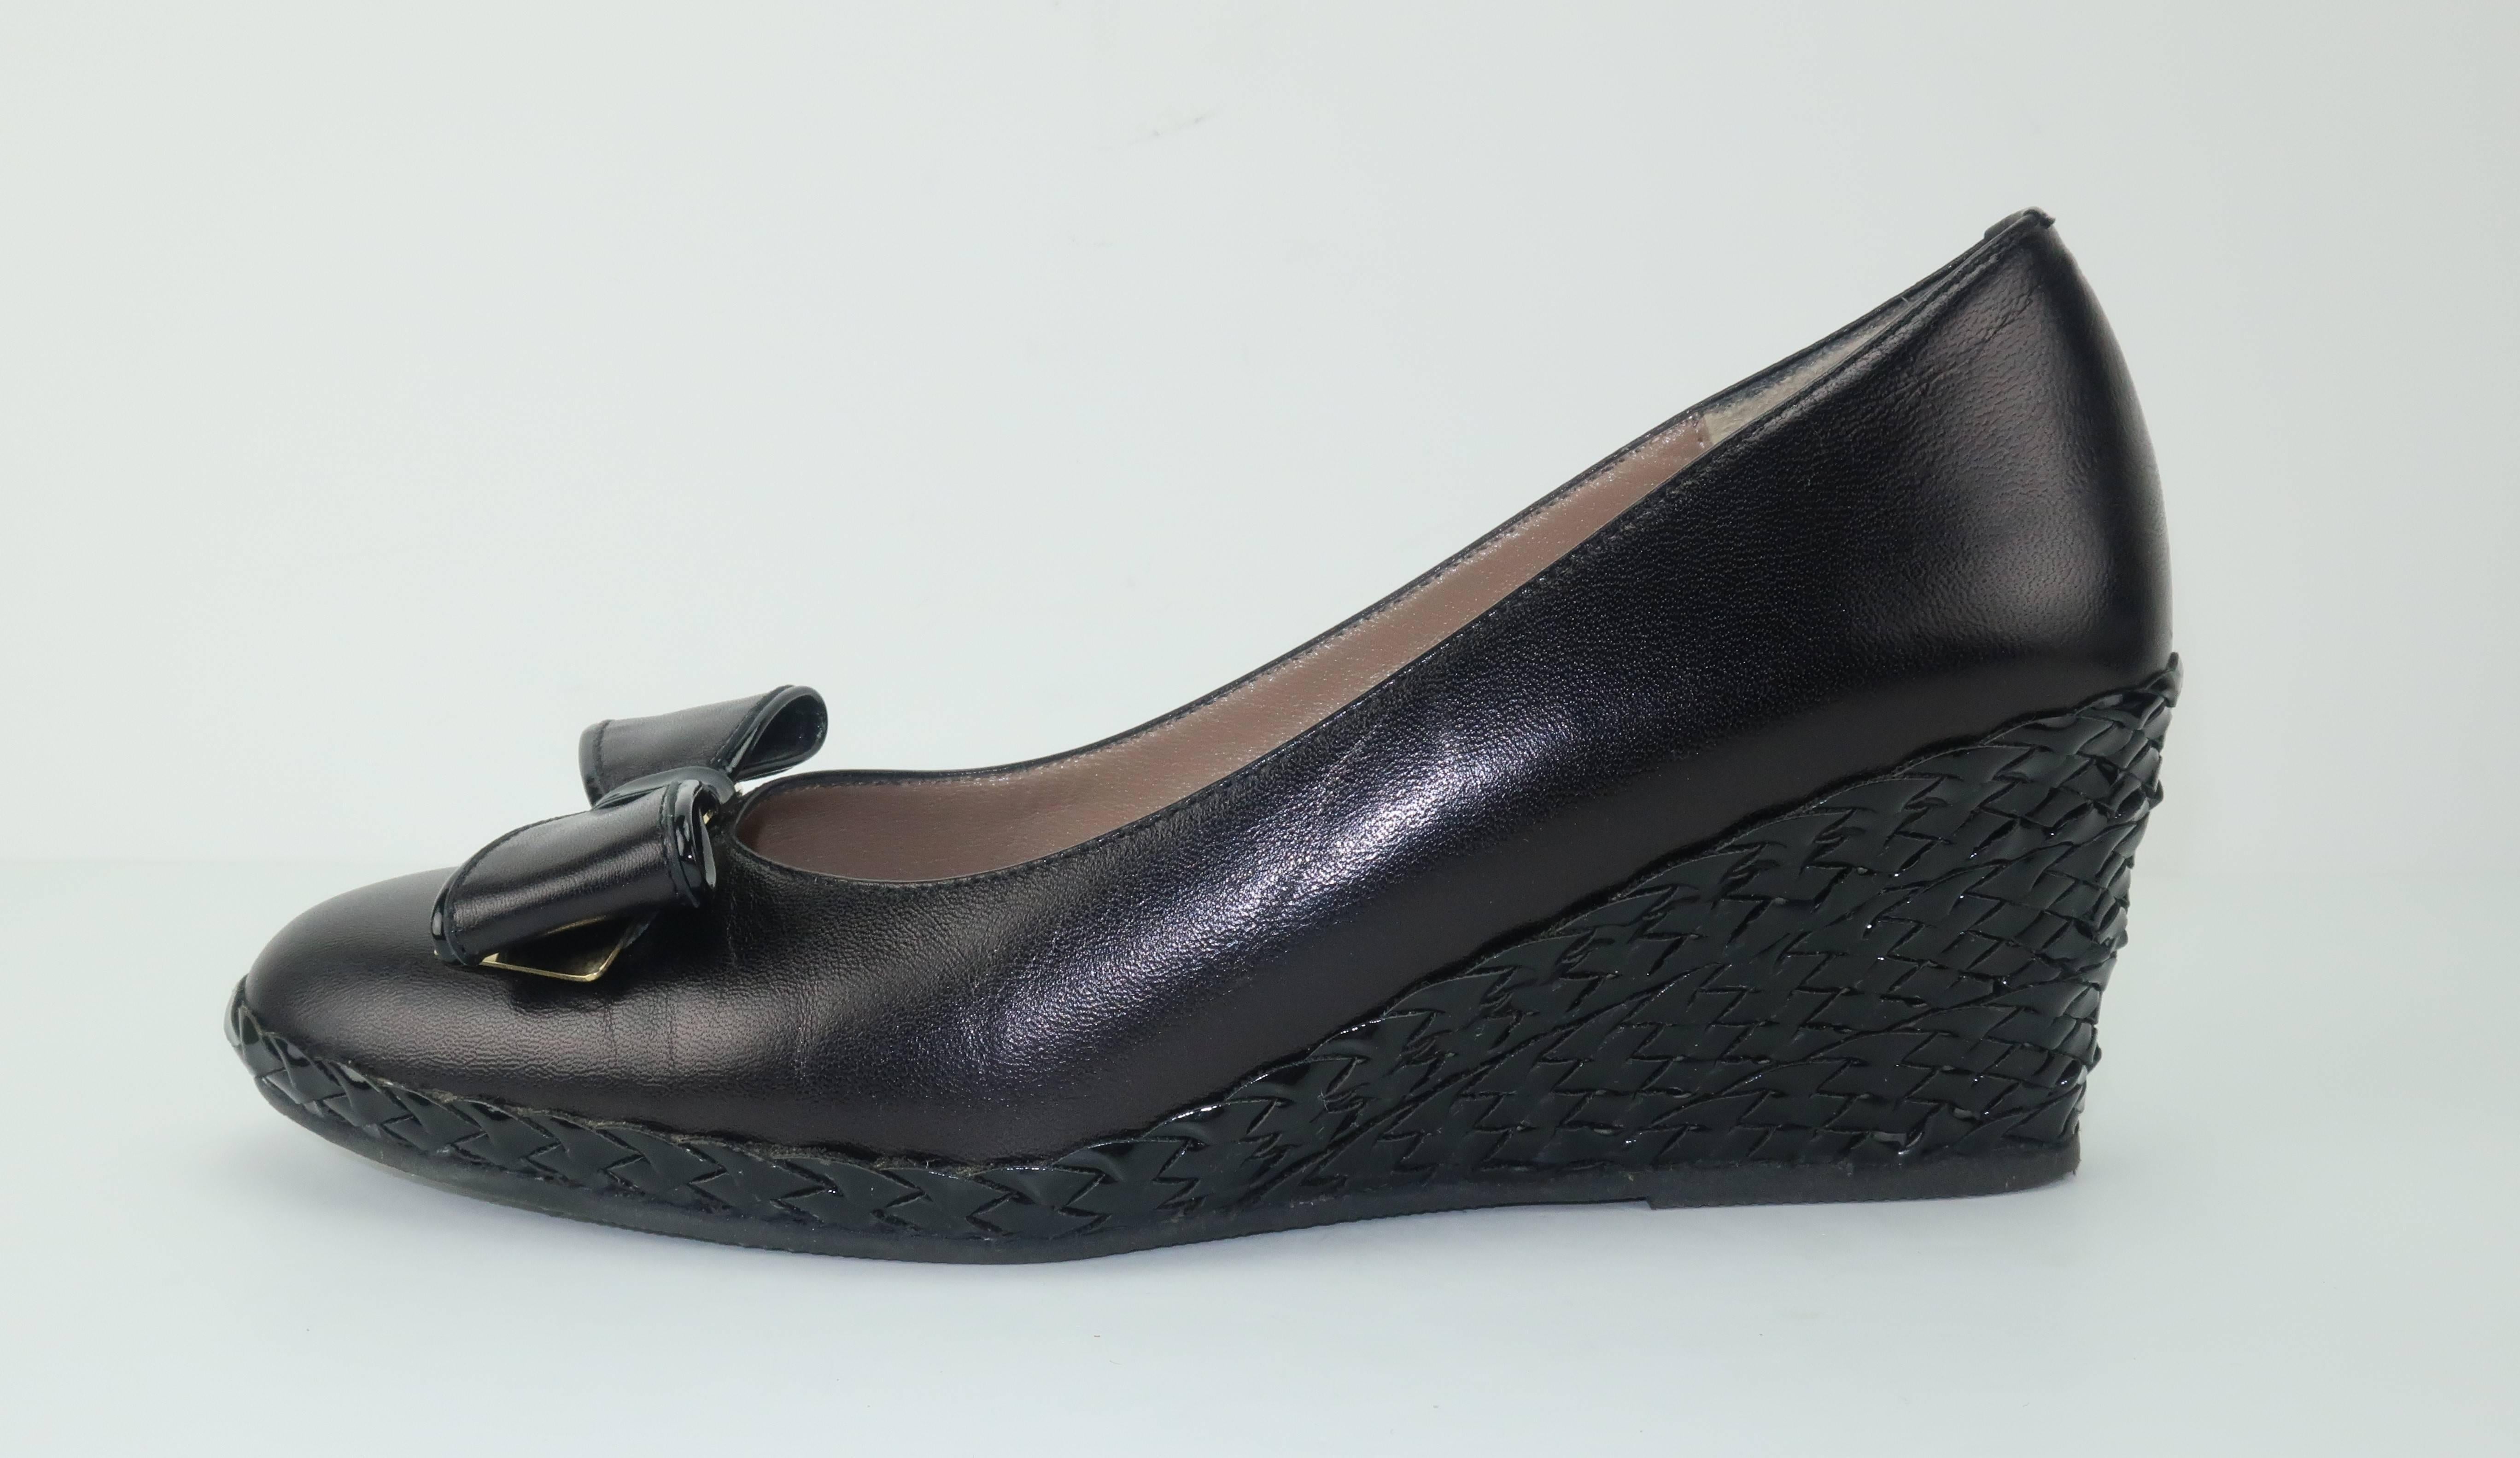 Bruno Magli Black Leather Wedge Shoes With Bow Tie Detail Sz 37 4